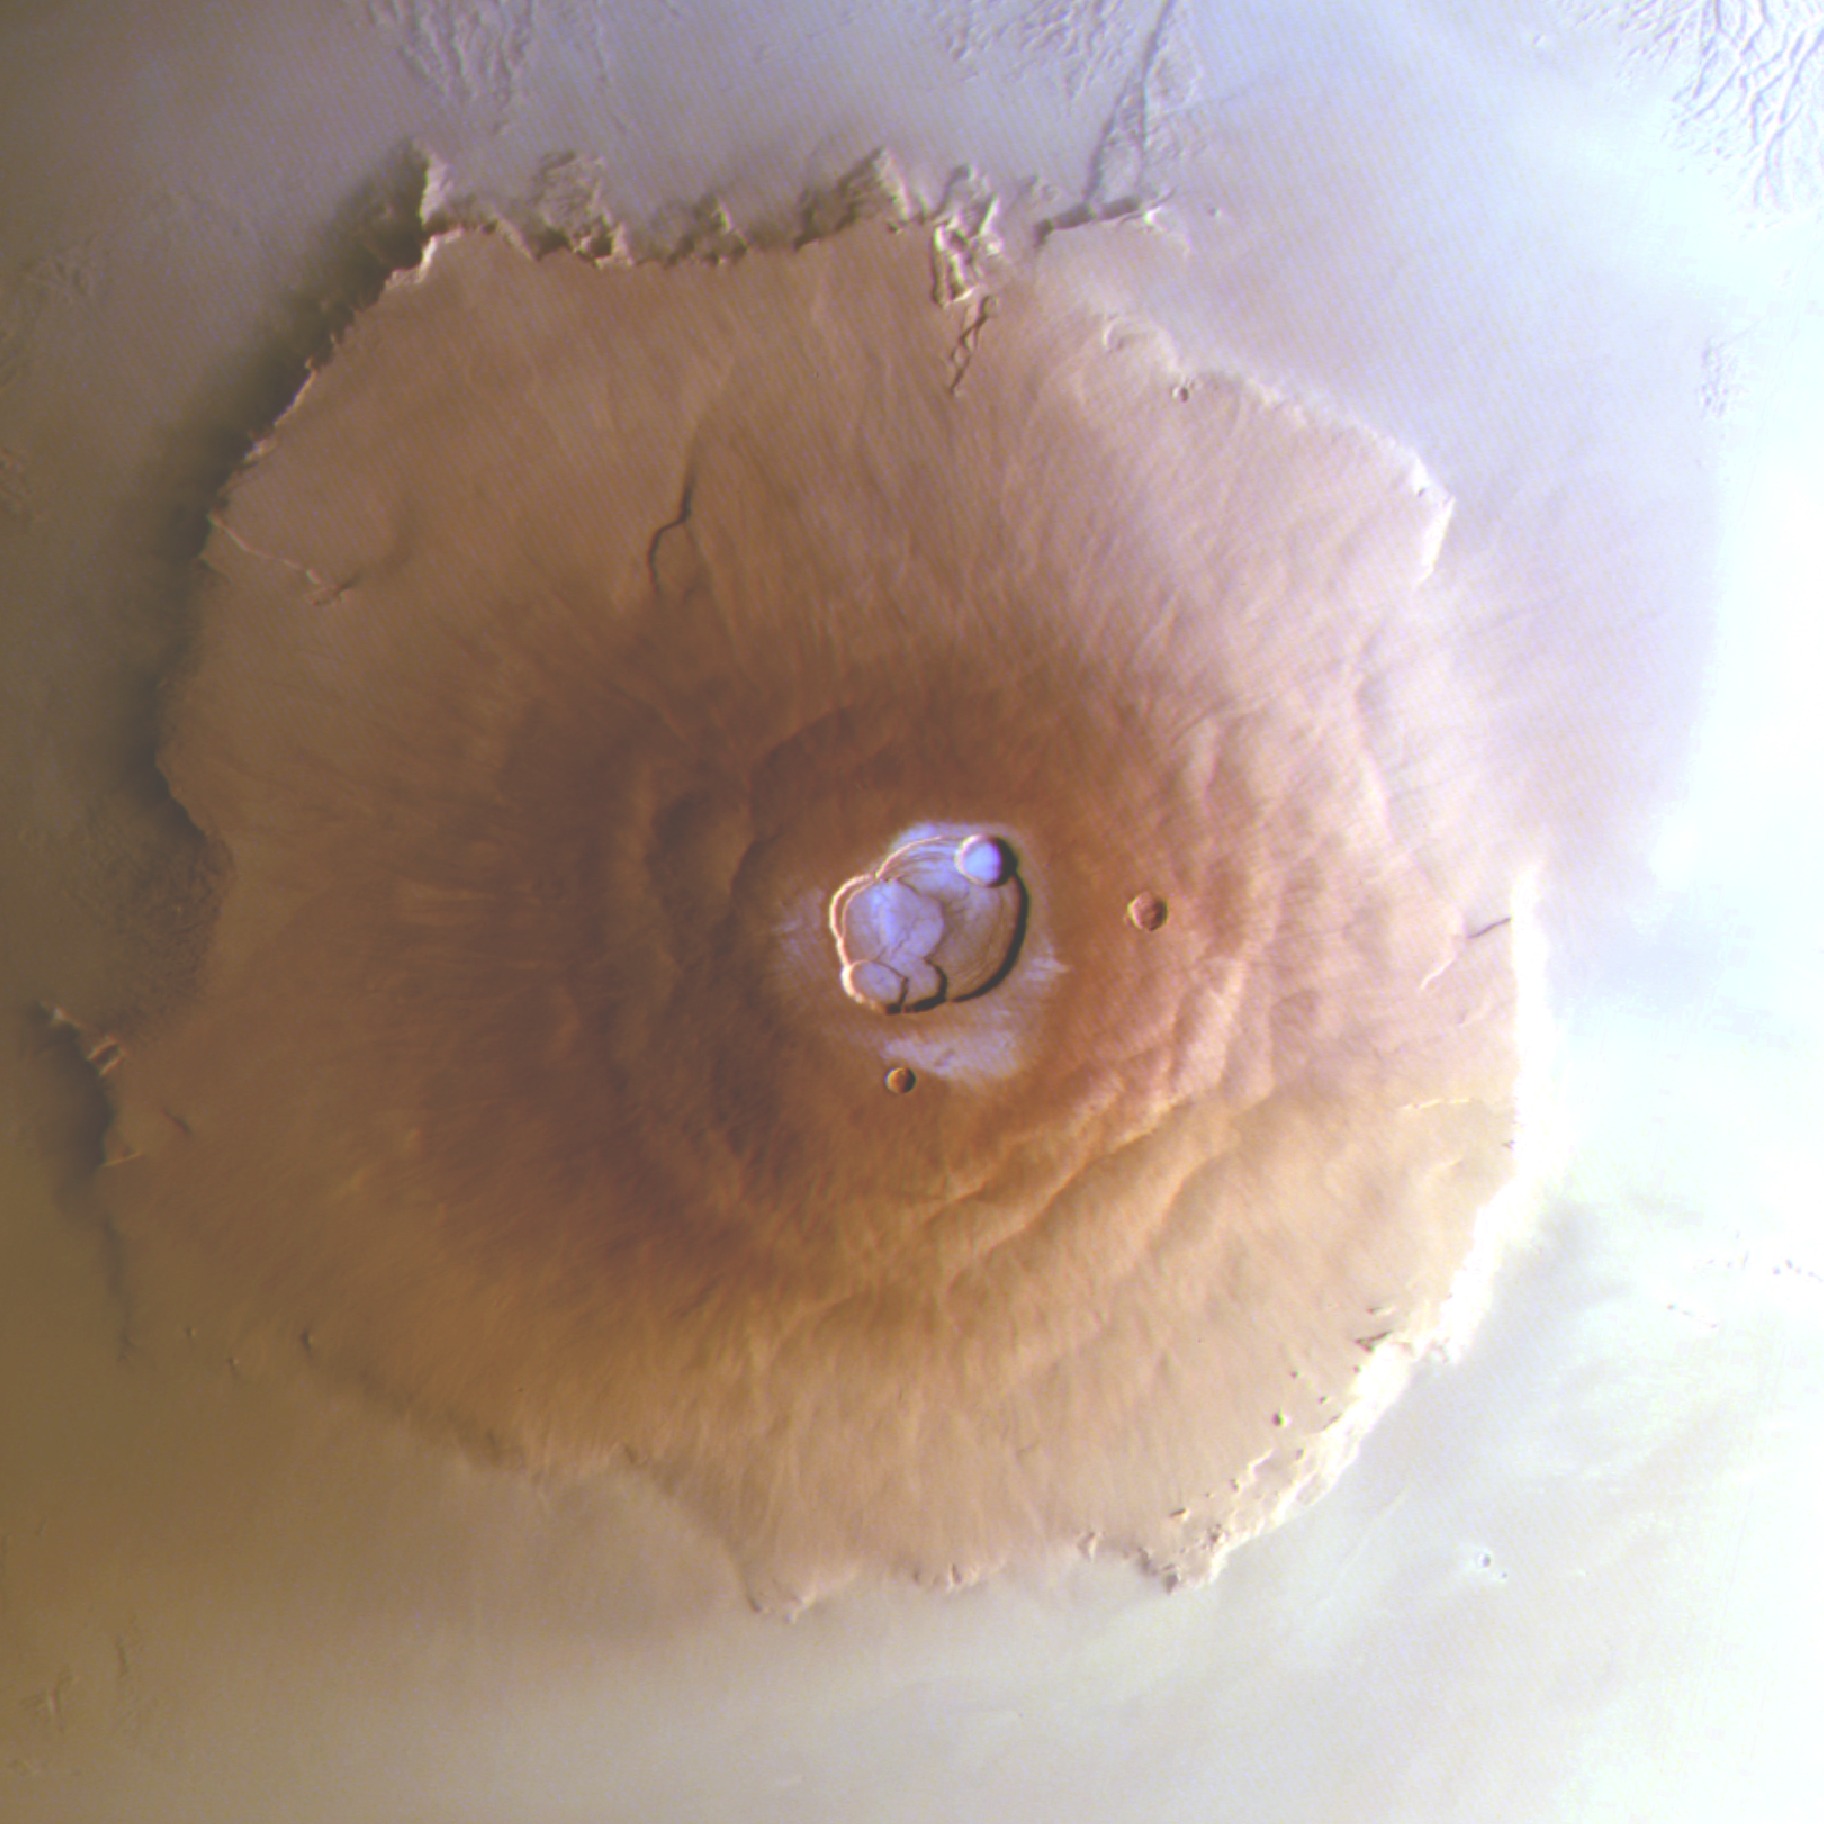 Frost (blue) covers the summit of Olympus Mons, the highest volcano in our solar system.  This image was taken by ESA's Mars Express orbiter at 7:20 am local Martian time.  The right side of the mountain is illuminated by the rising sun from the east.  Credit: ESA/DLR/FU Berlin.